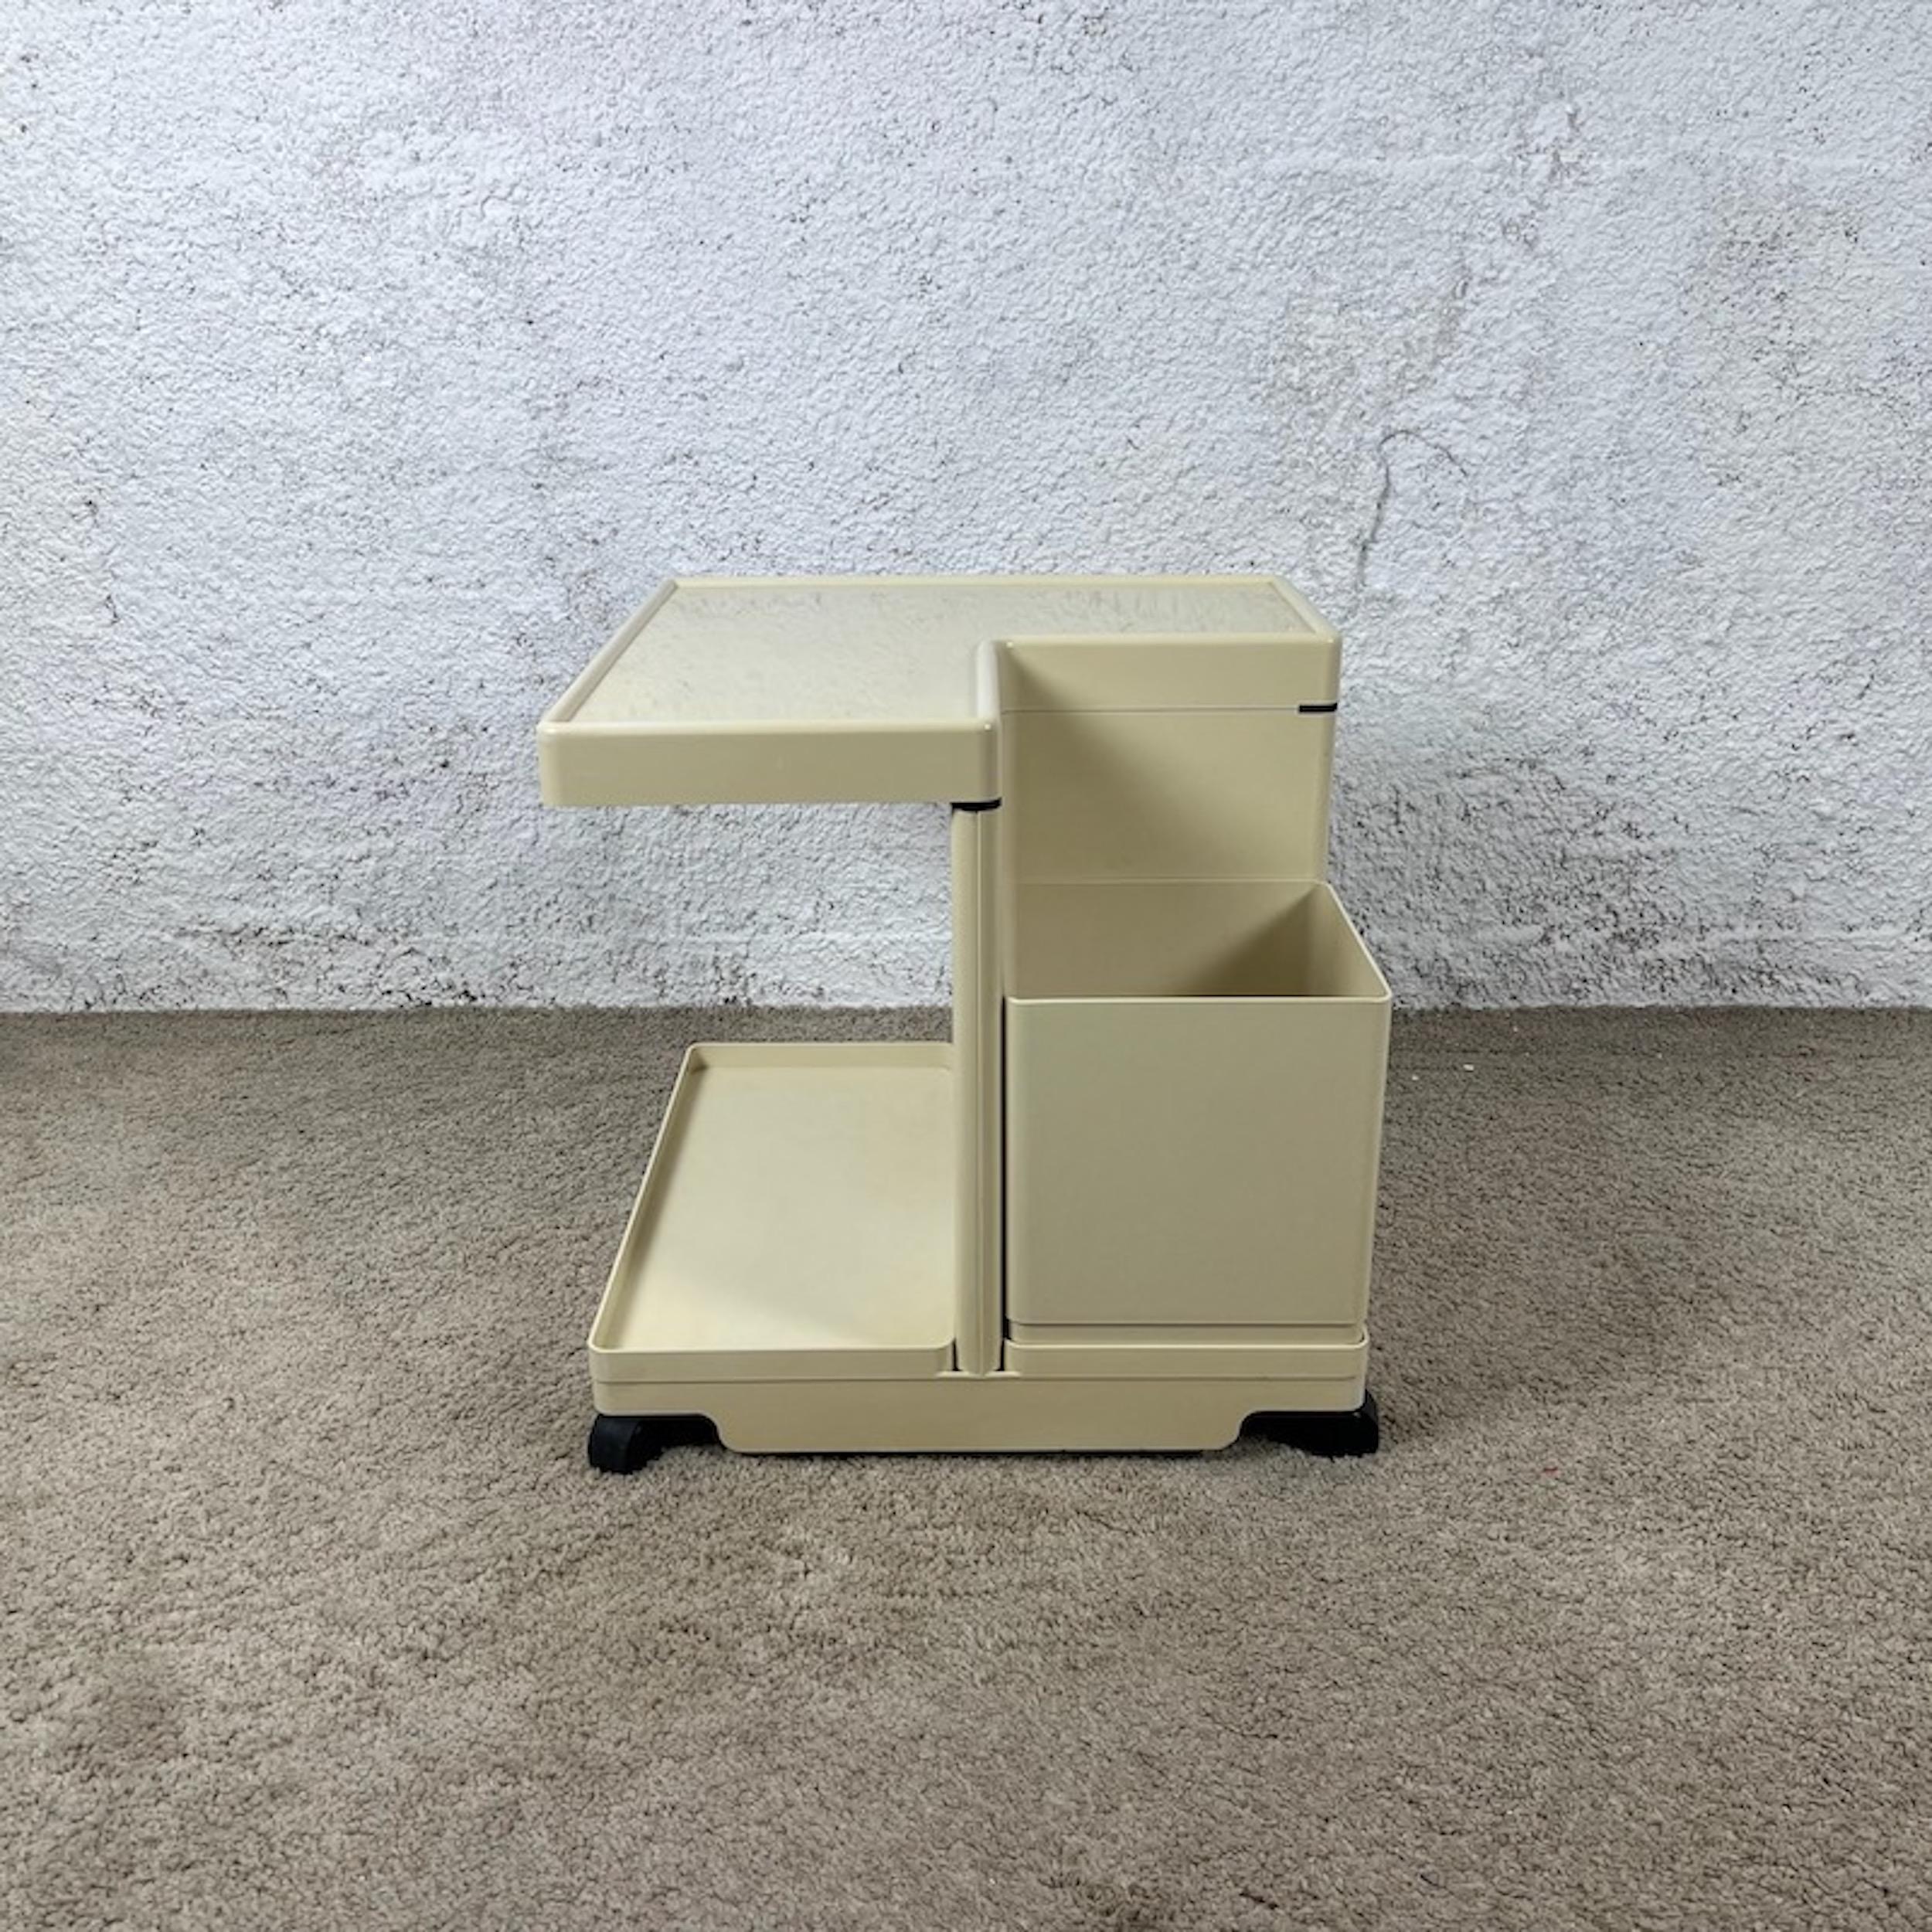 Beautiful and rare organiser trolley from the iconic DOMA series, produced by iGuzzini in the 70s.

This beautiful organizer is highly versatile: it can be used as a portable cabinet, a magazine rack, a serving trolley. It has a movable box and